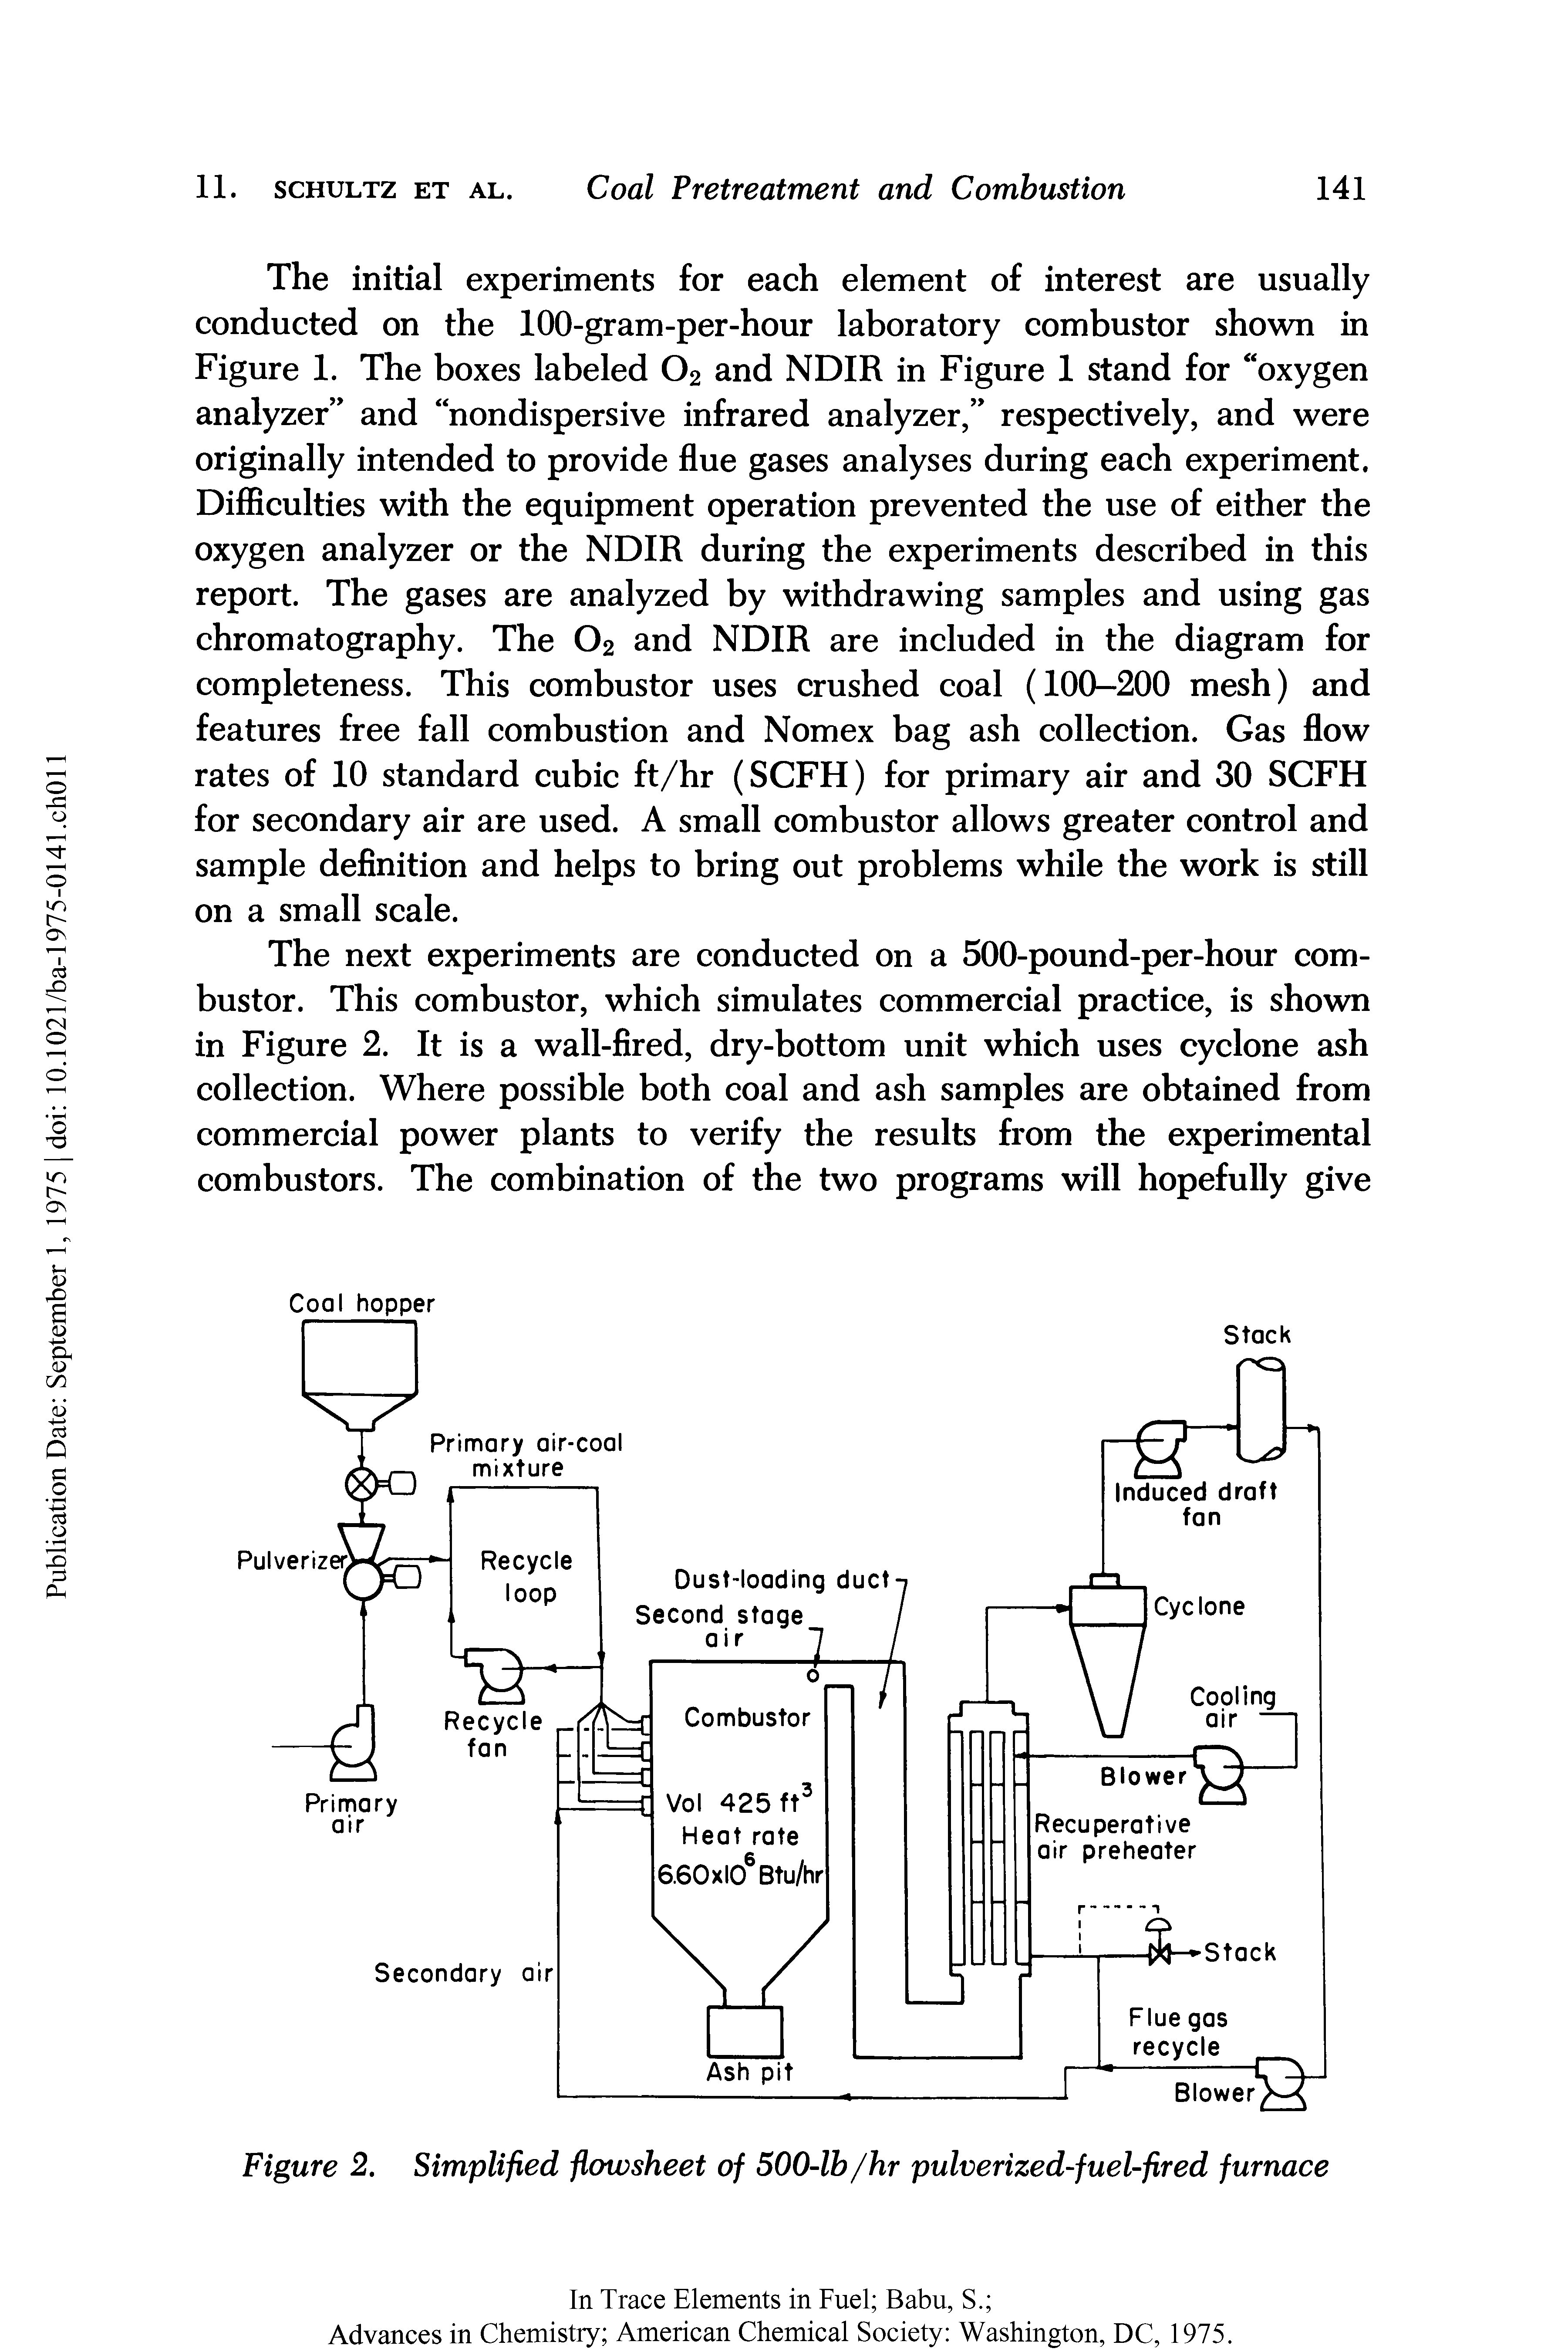 Figure 2. Simplified flowsheet of 500-lb/hr pulverized-fuel-fired furnace...